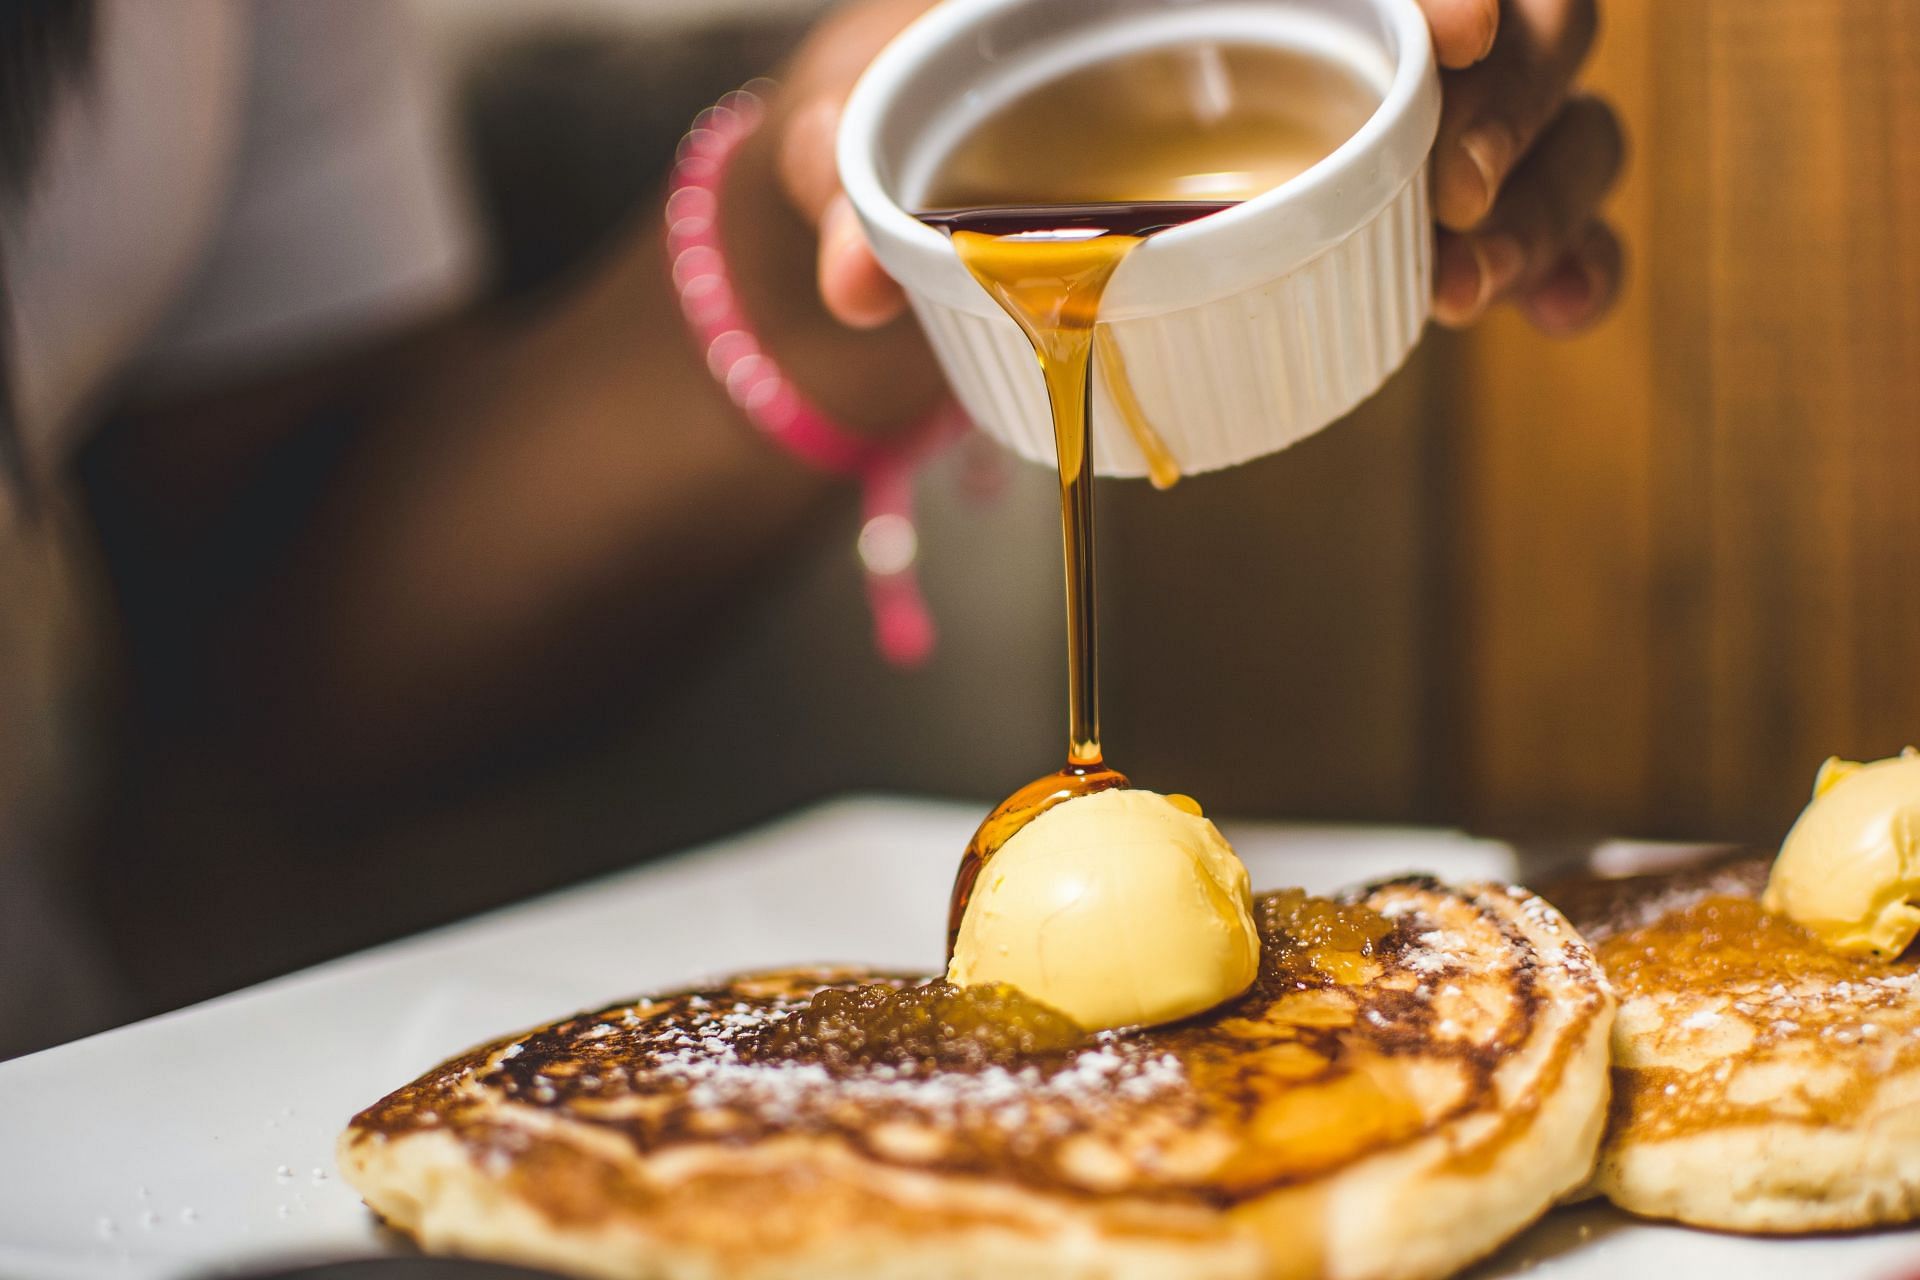 This syrup is used in several desserts. (Image via Unsplash/ Kobby Mendez)